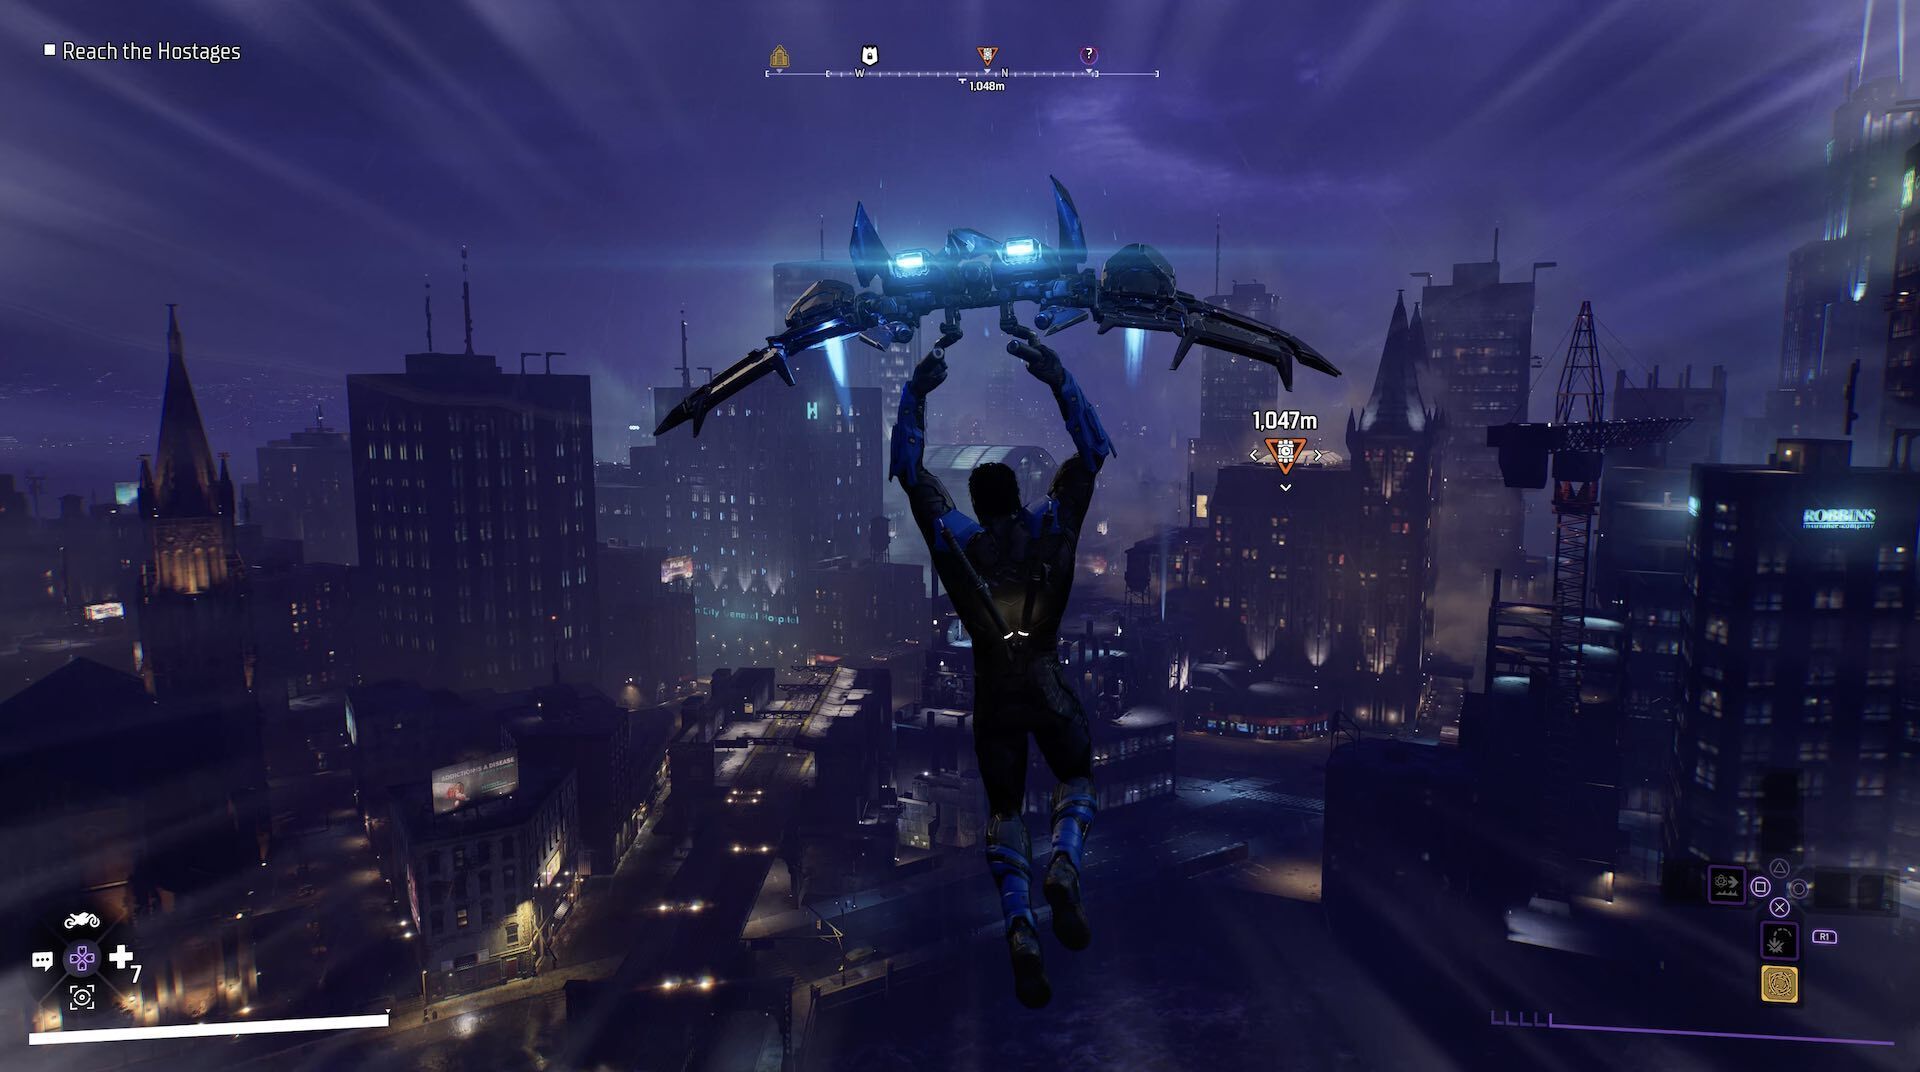 Gotham Knights Gets 13 Min New Gameplay, Becomes Next-Gen Only